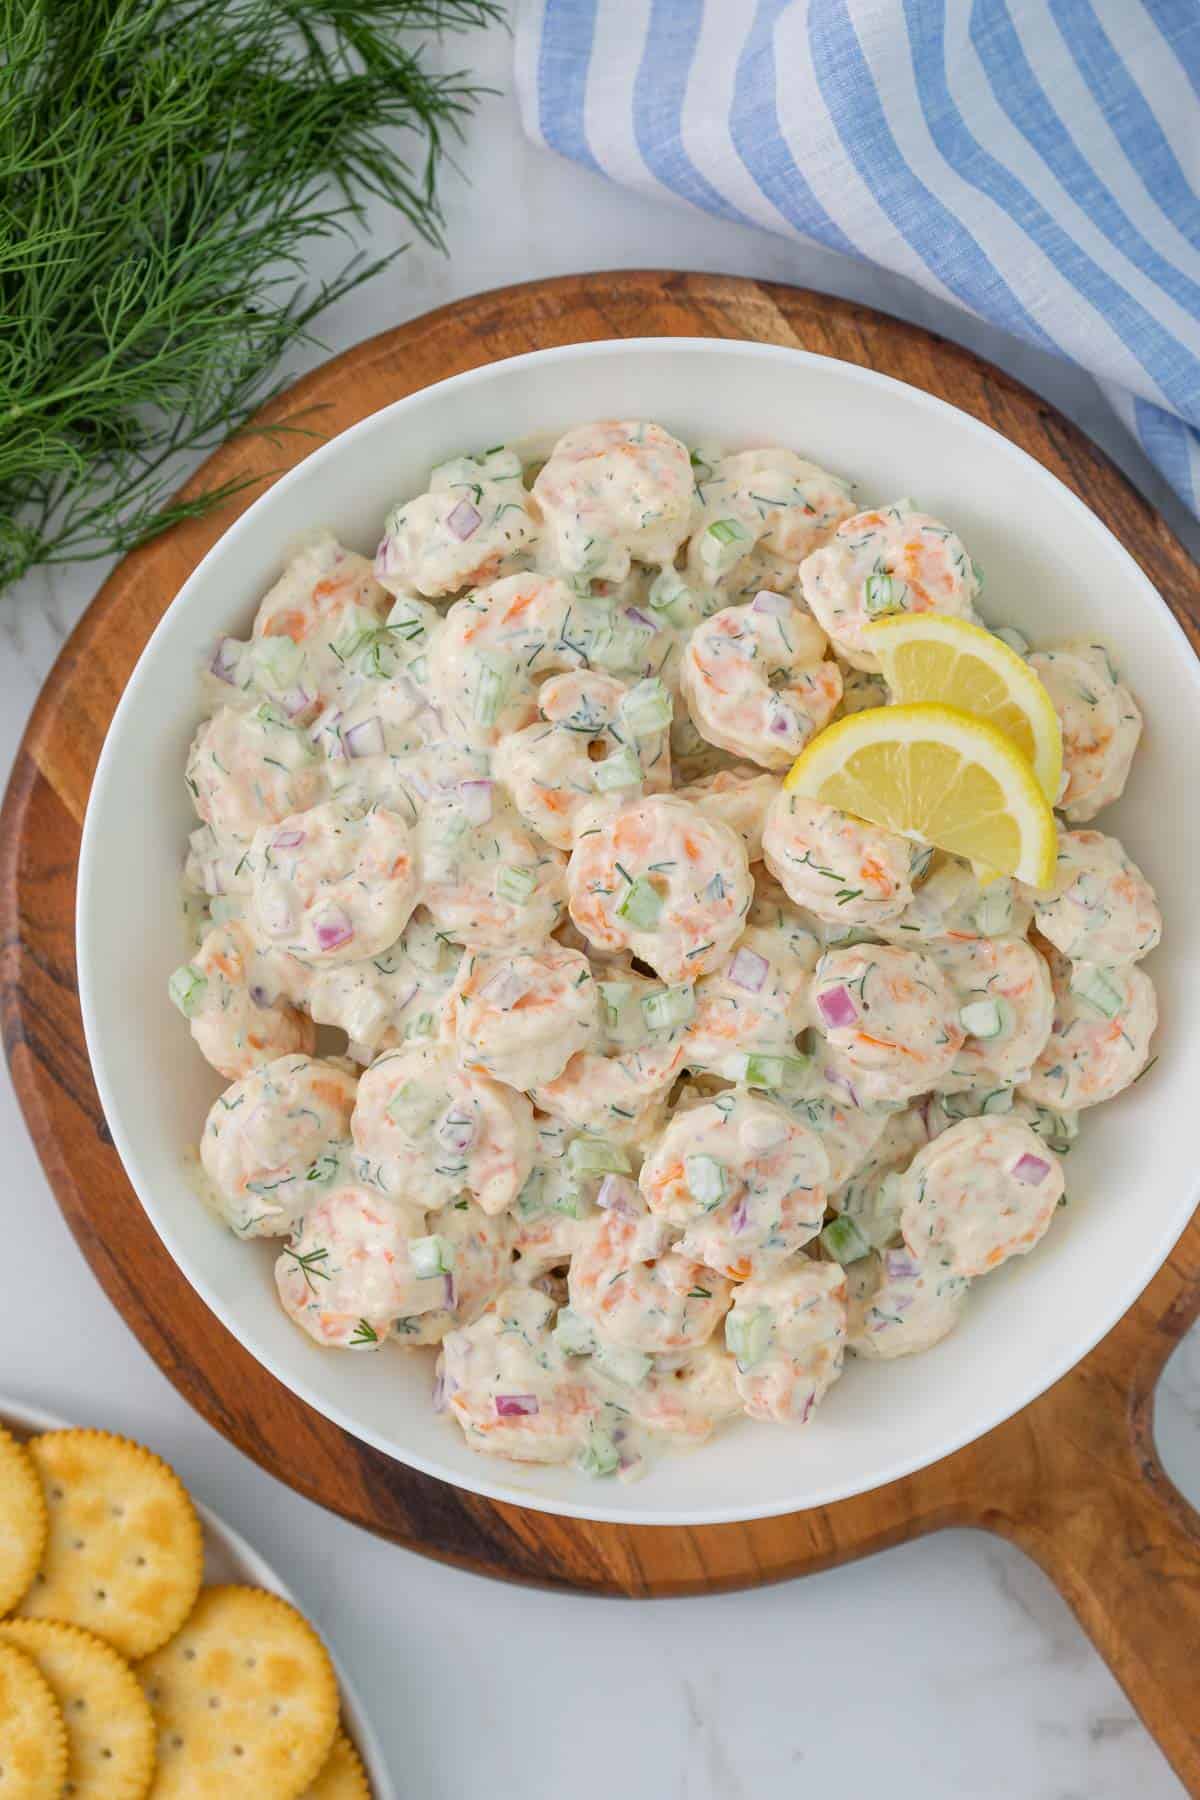 Shrimp salad in a white bowl beside a plate of crackers.